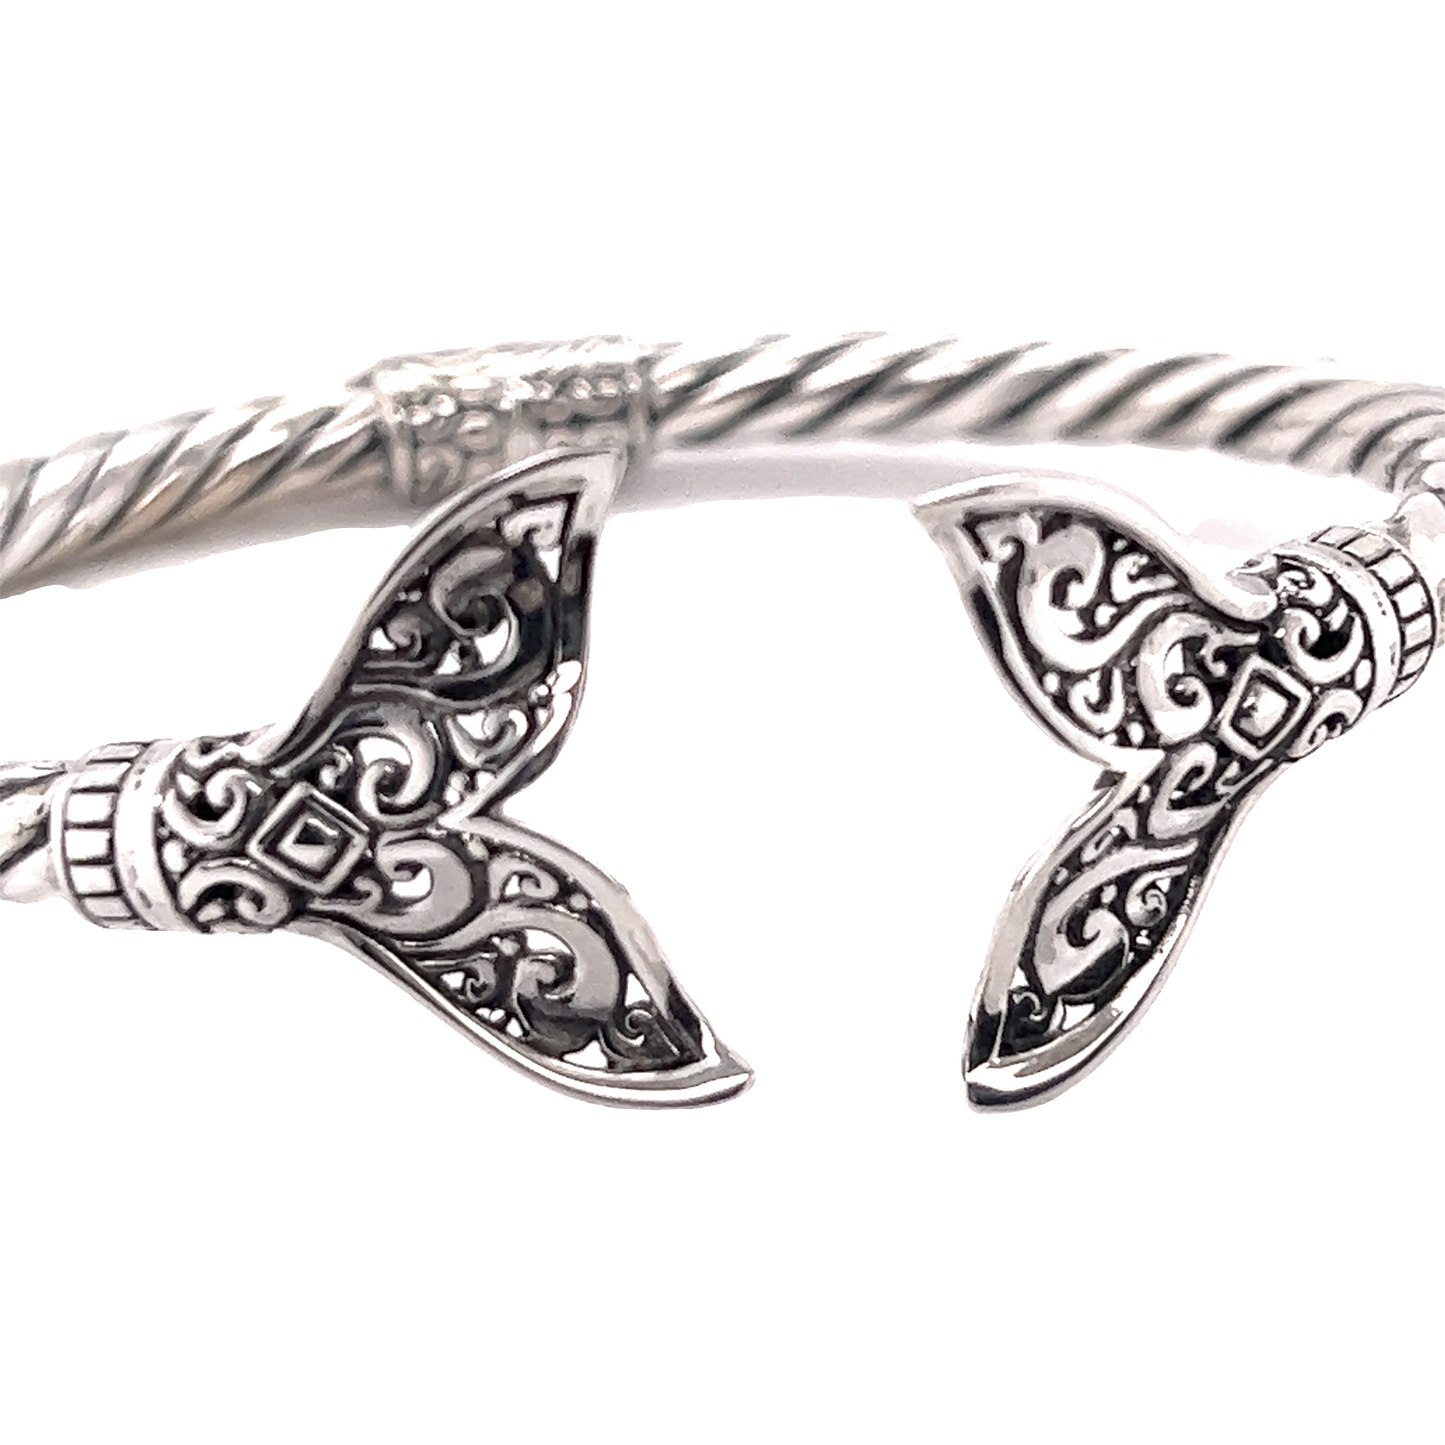 Super Silver's Majestic Full Filigree Whale Tail Cuff Bracelet, inspired by the enchanting ocean of Santa Cruz.